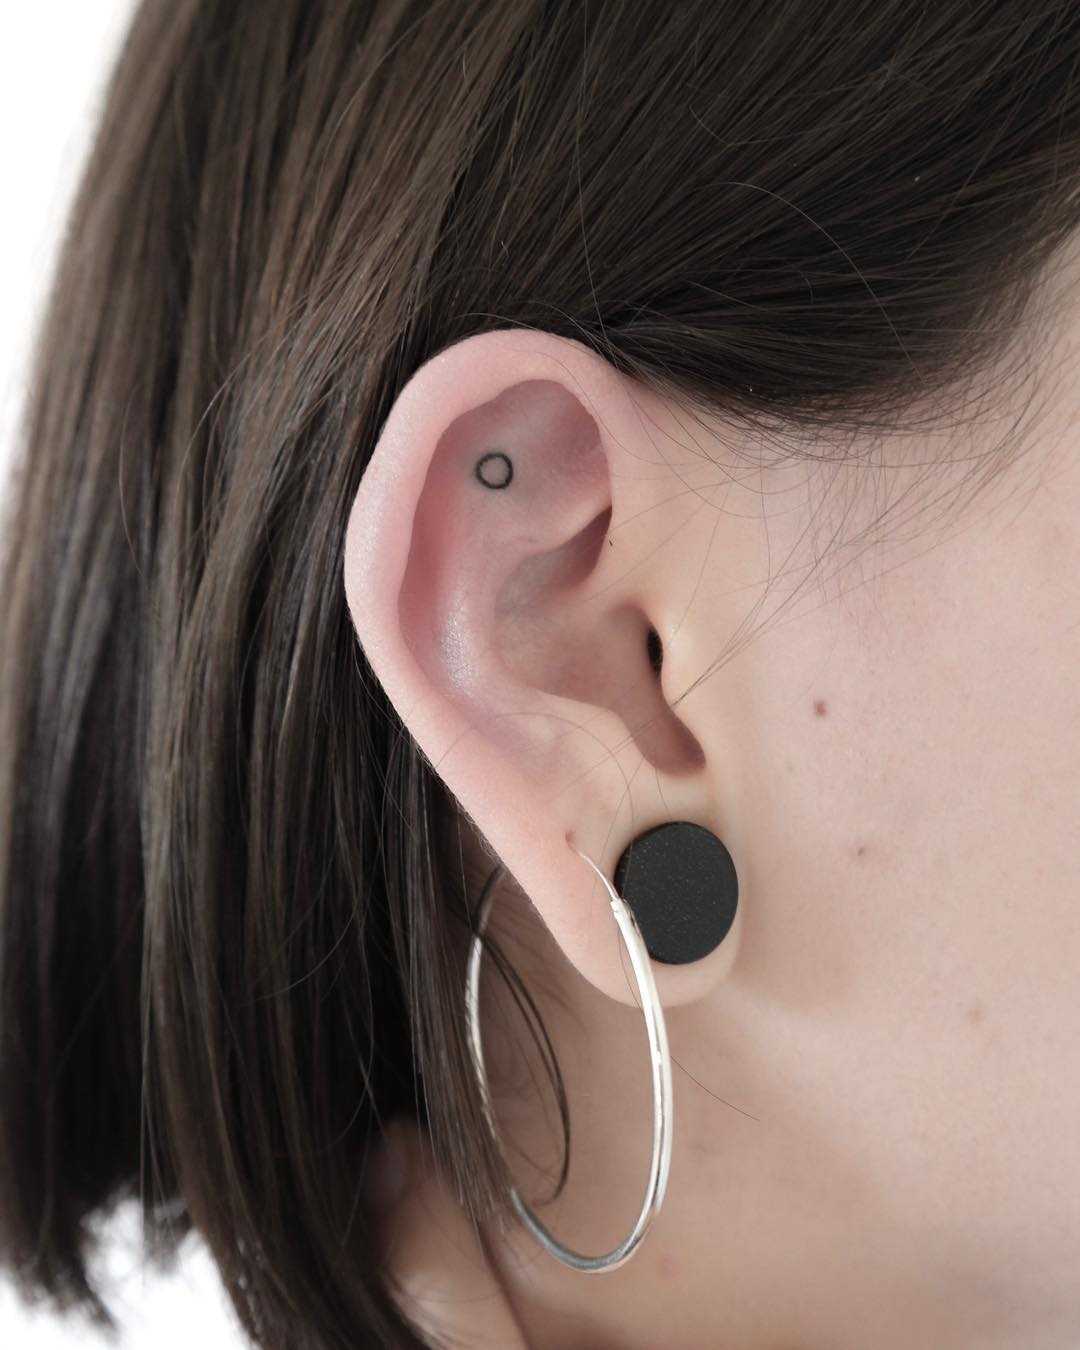 Tiny circle tattoo on the ear by Ann Gilberg